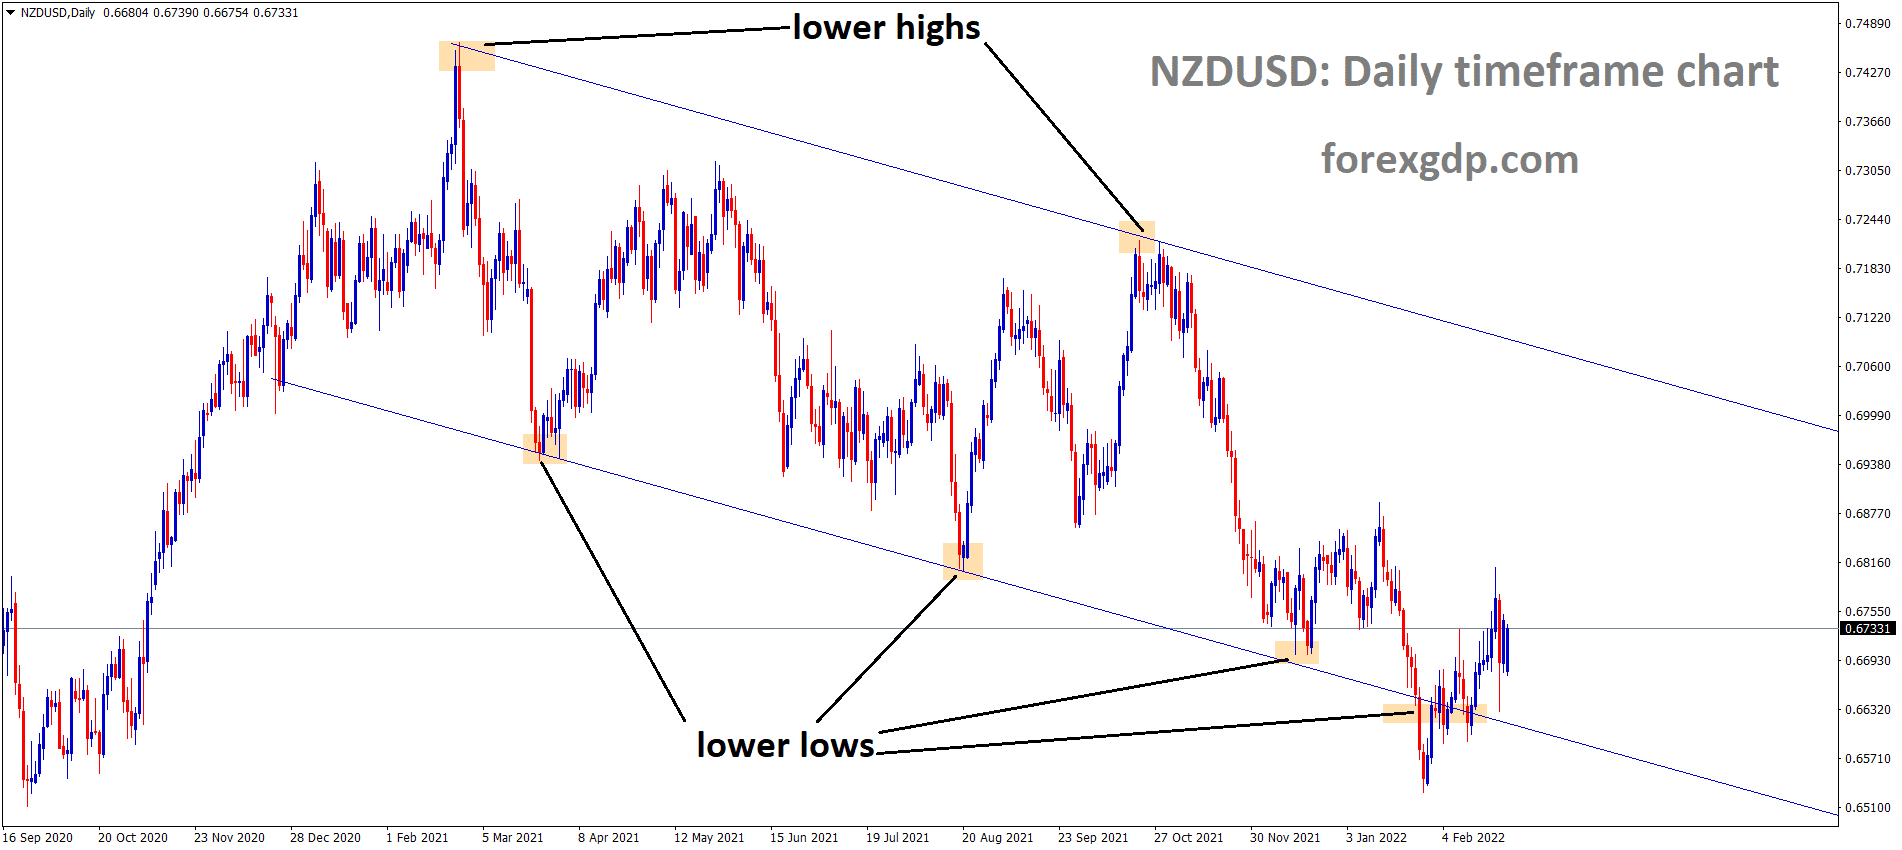 NZDUSD is moving in the Descending channel and the market has rebounded from the lower low area of the channel. 1